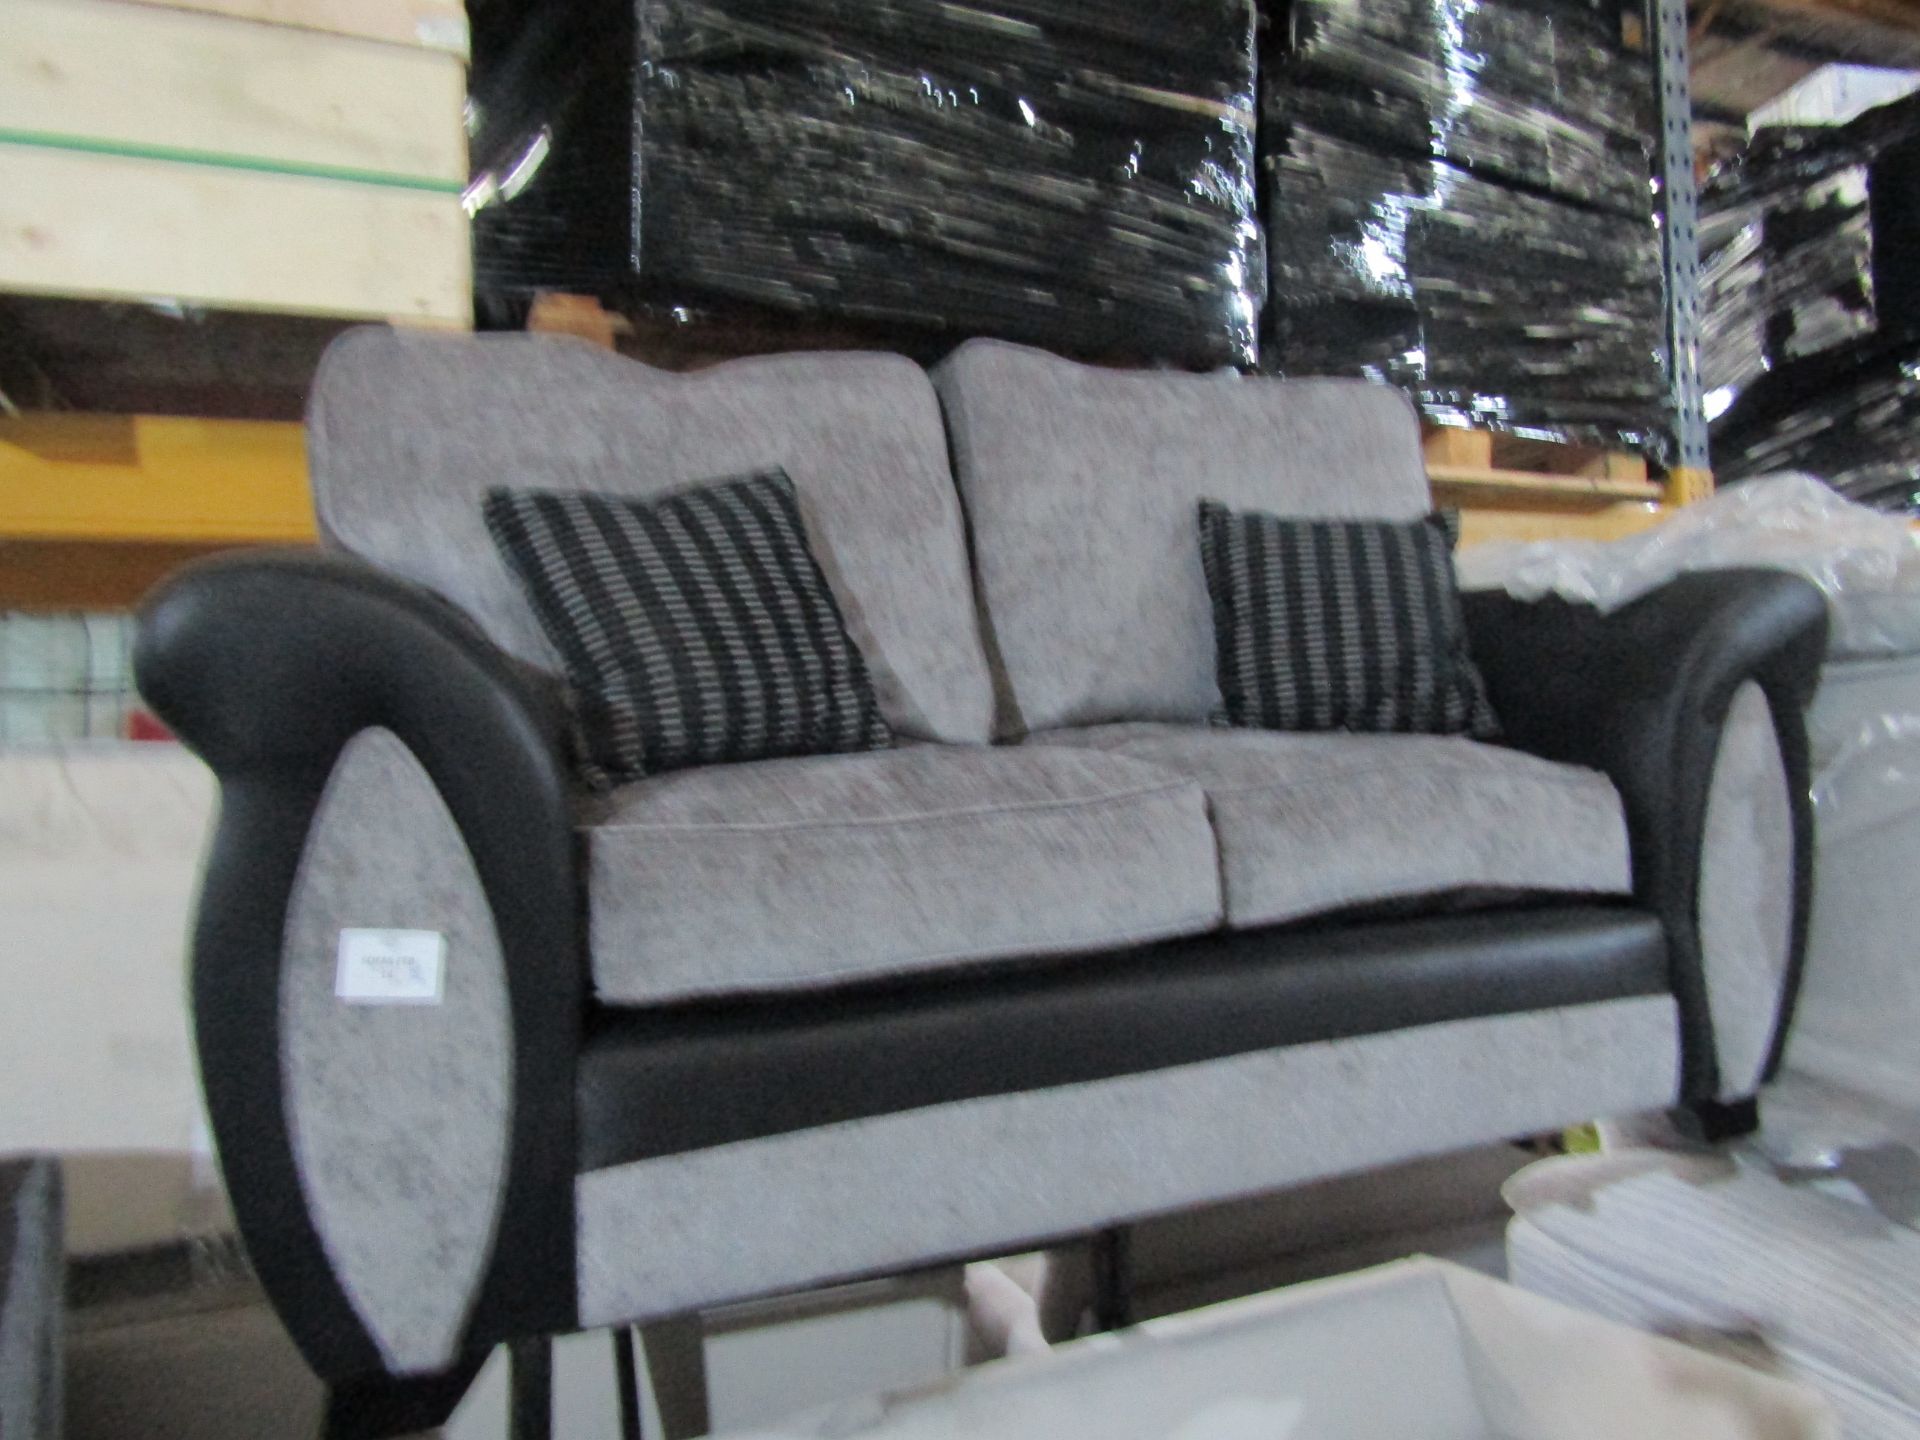 2 seater grey and black sofa, unchekced but looks in good condition at a glance